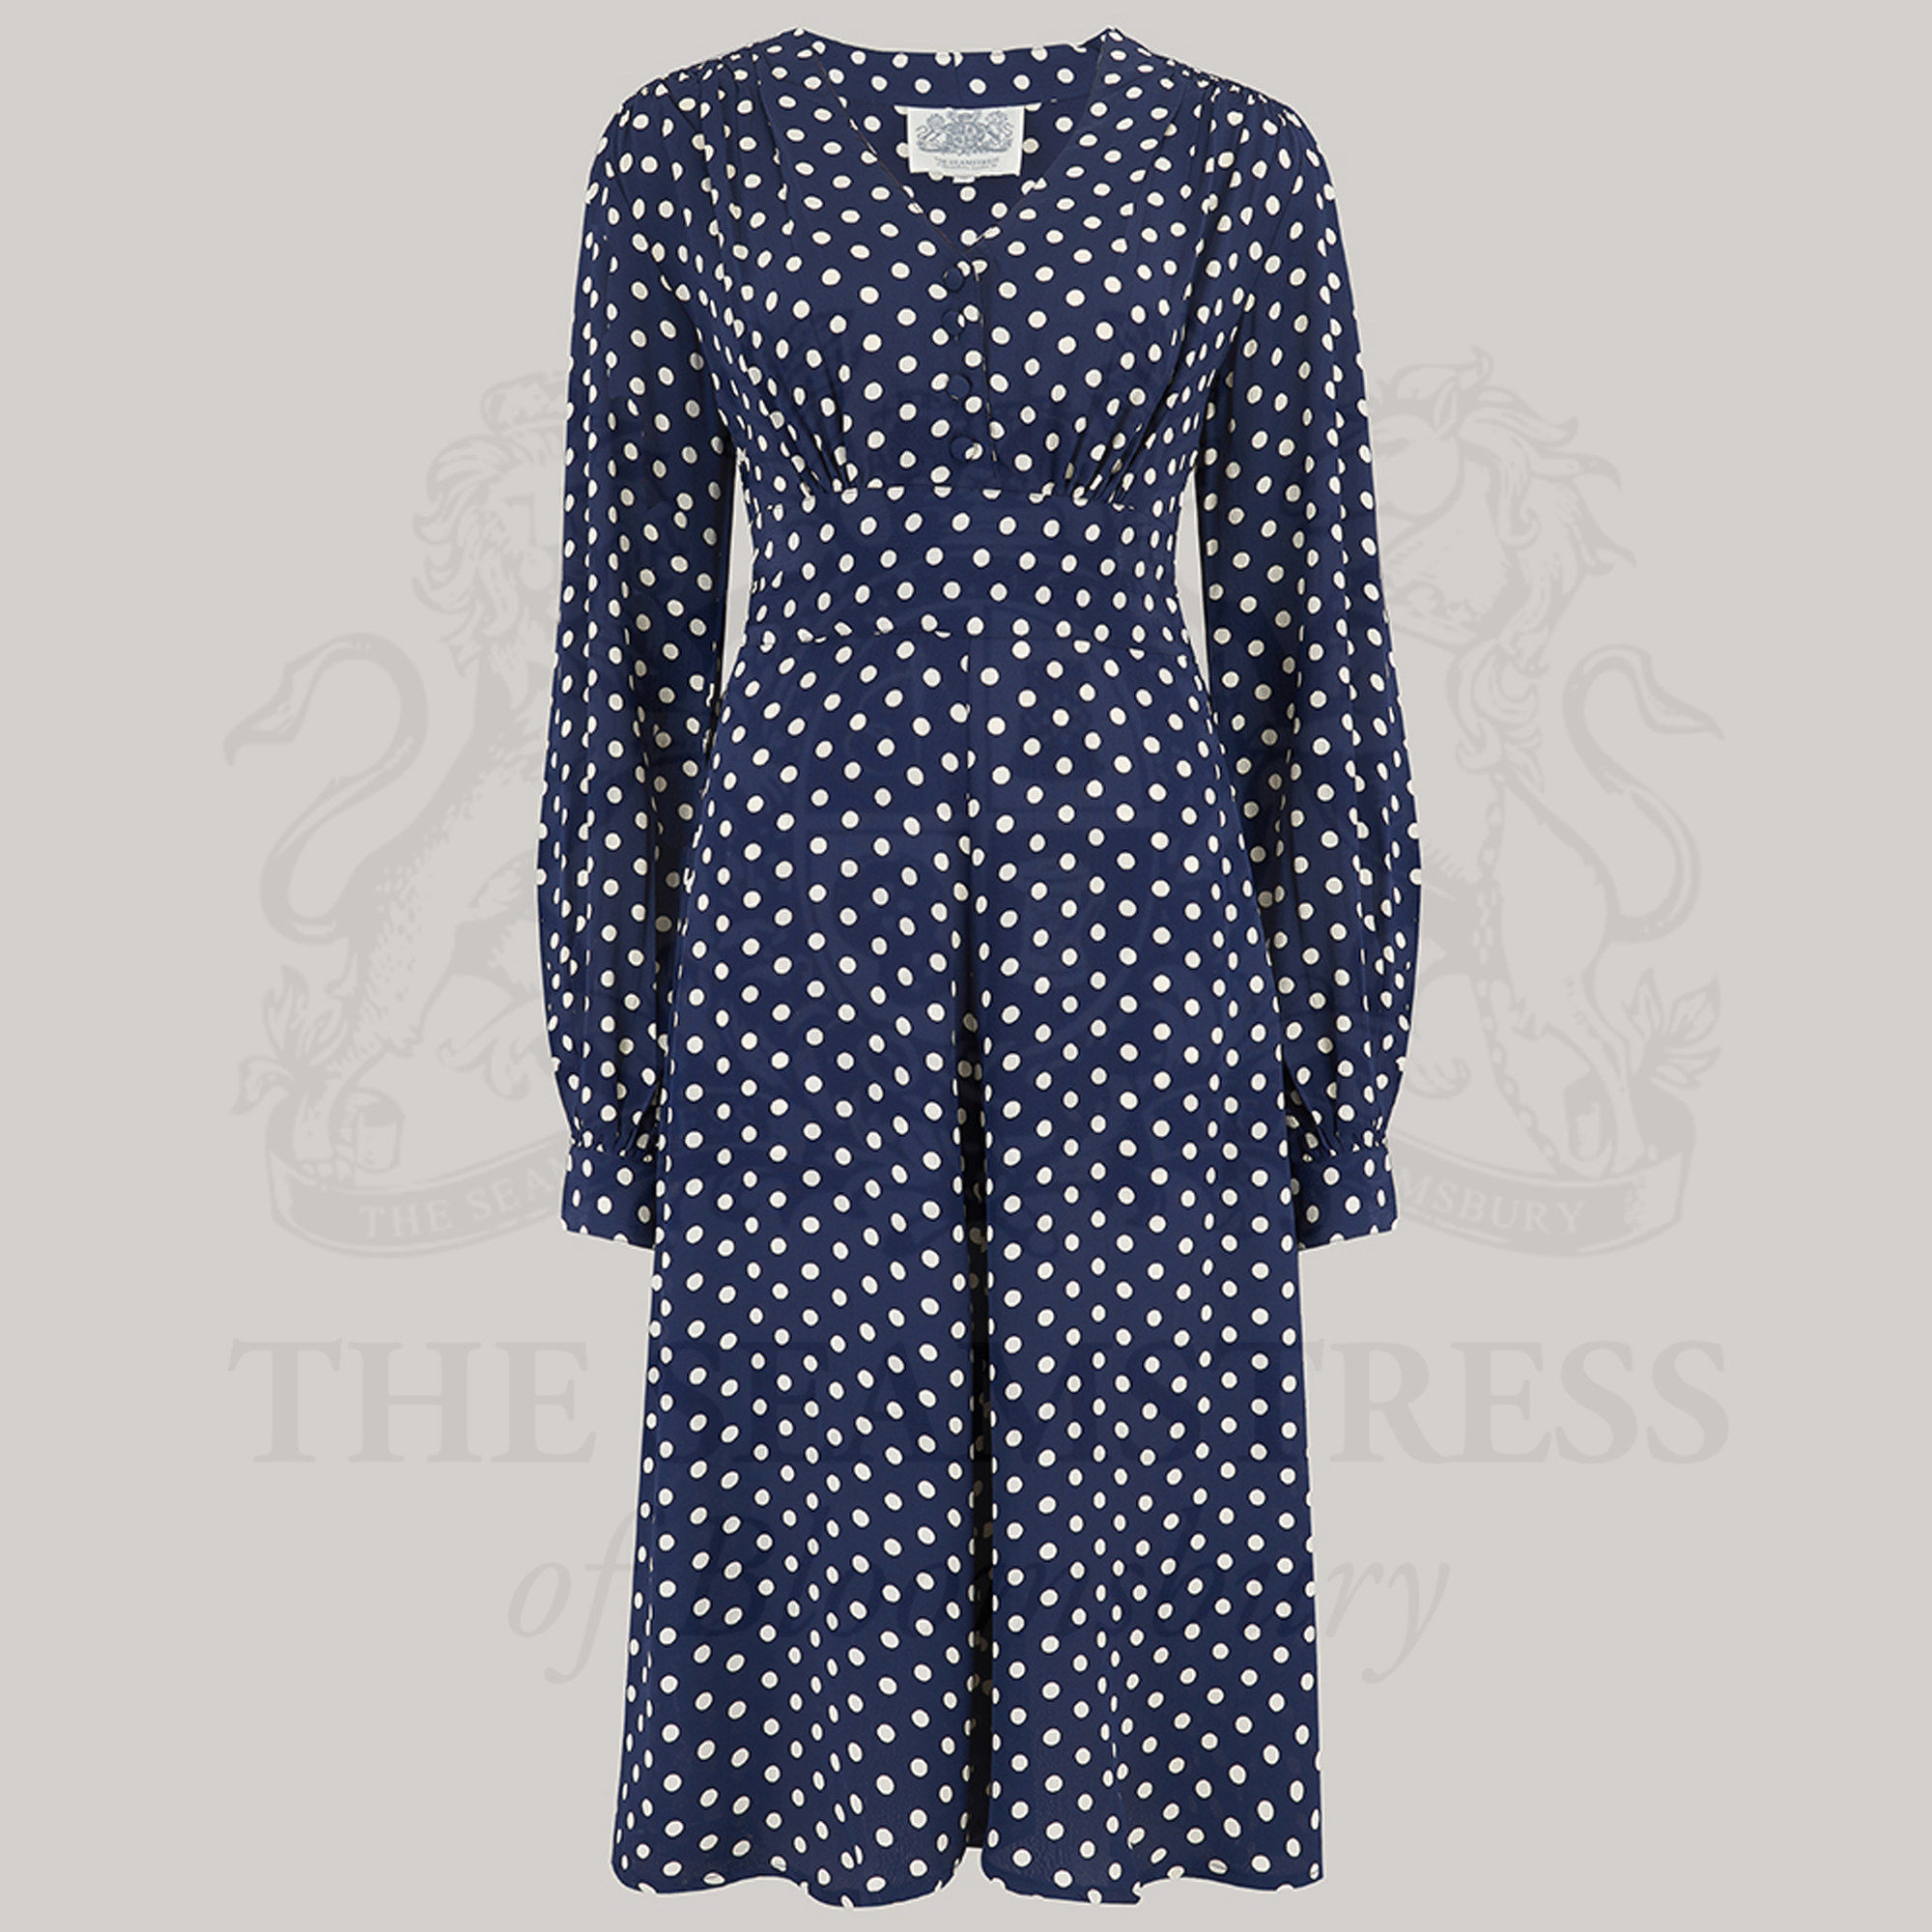 A 1940s style long sleeve dress in navy with cream polka dots. Featuring gauged-in top yoke detailing on the shoulders and sleeves that puff out fully at the cuff. 4 small buttons down the front of the dress, and a tie-waist belt. 